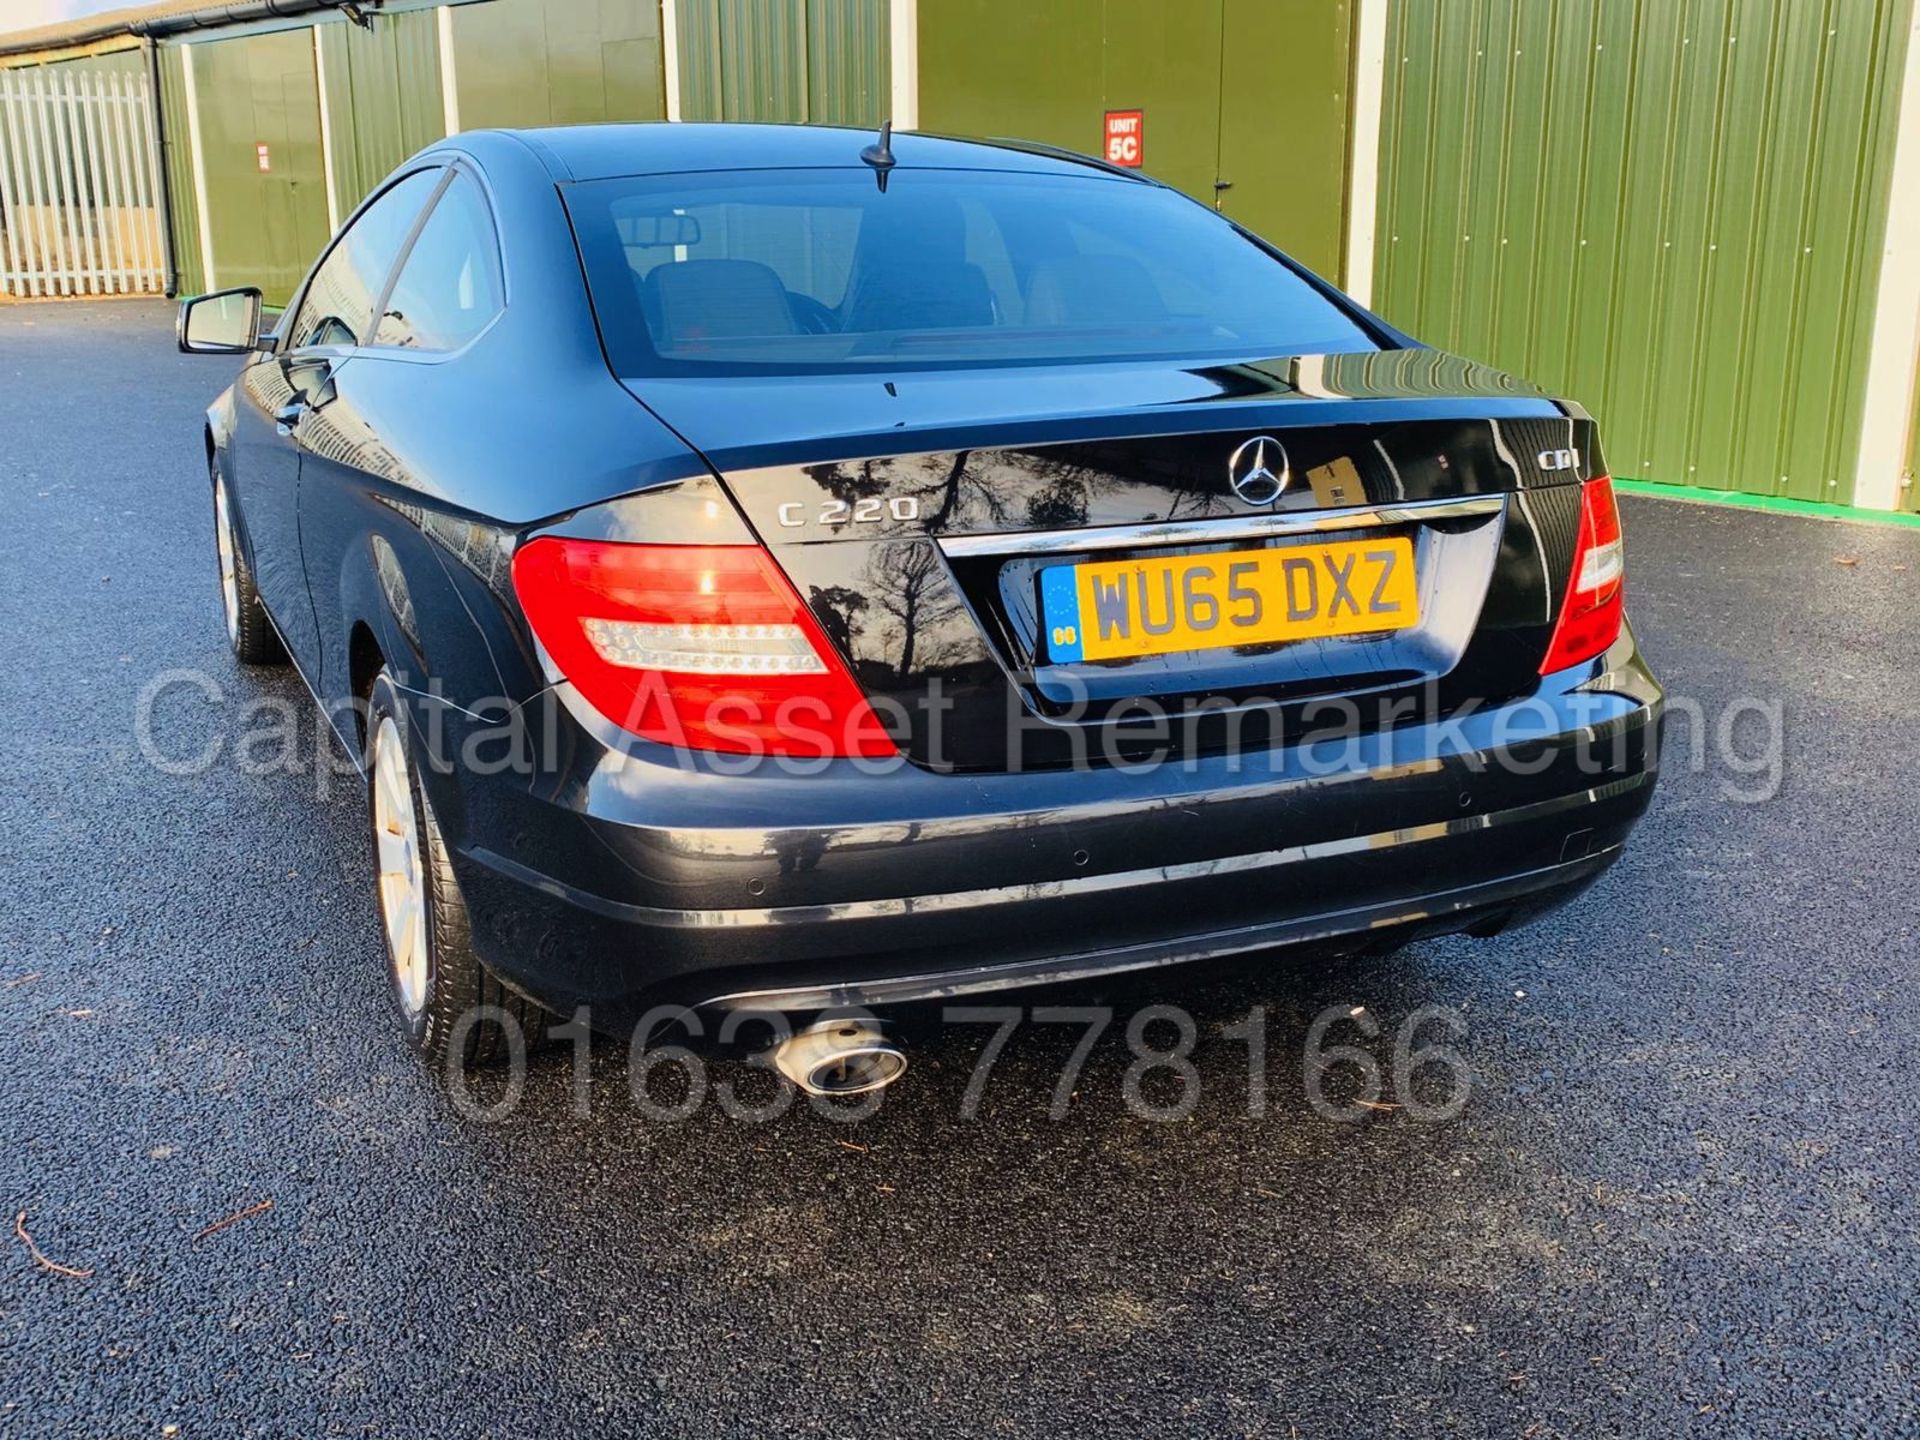 (On Sale) MERCEDES-BENZ C220 CDI *EXECUTIVE* COUPE VERSION (65 REG) **MASSIVE SPEC** (FULL HISTORY) - Image 9 of 42